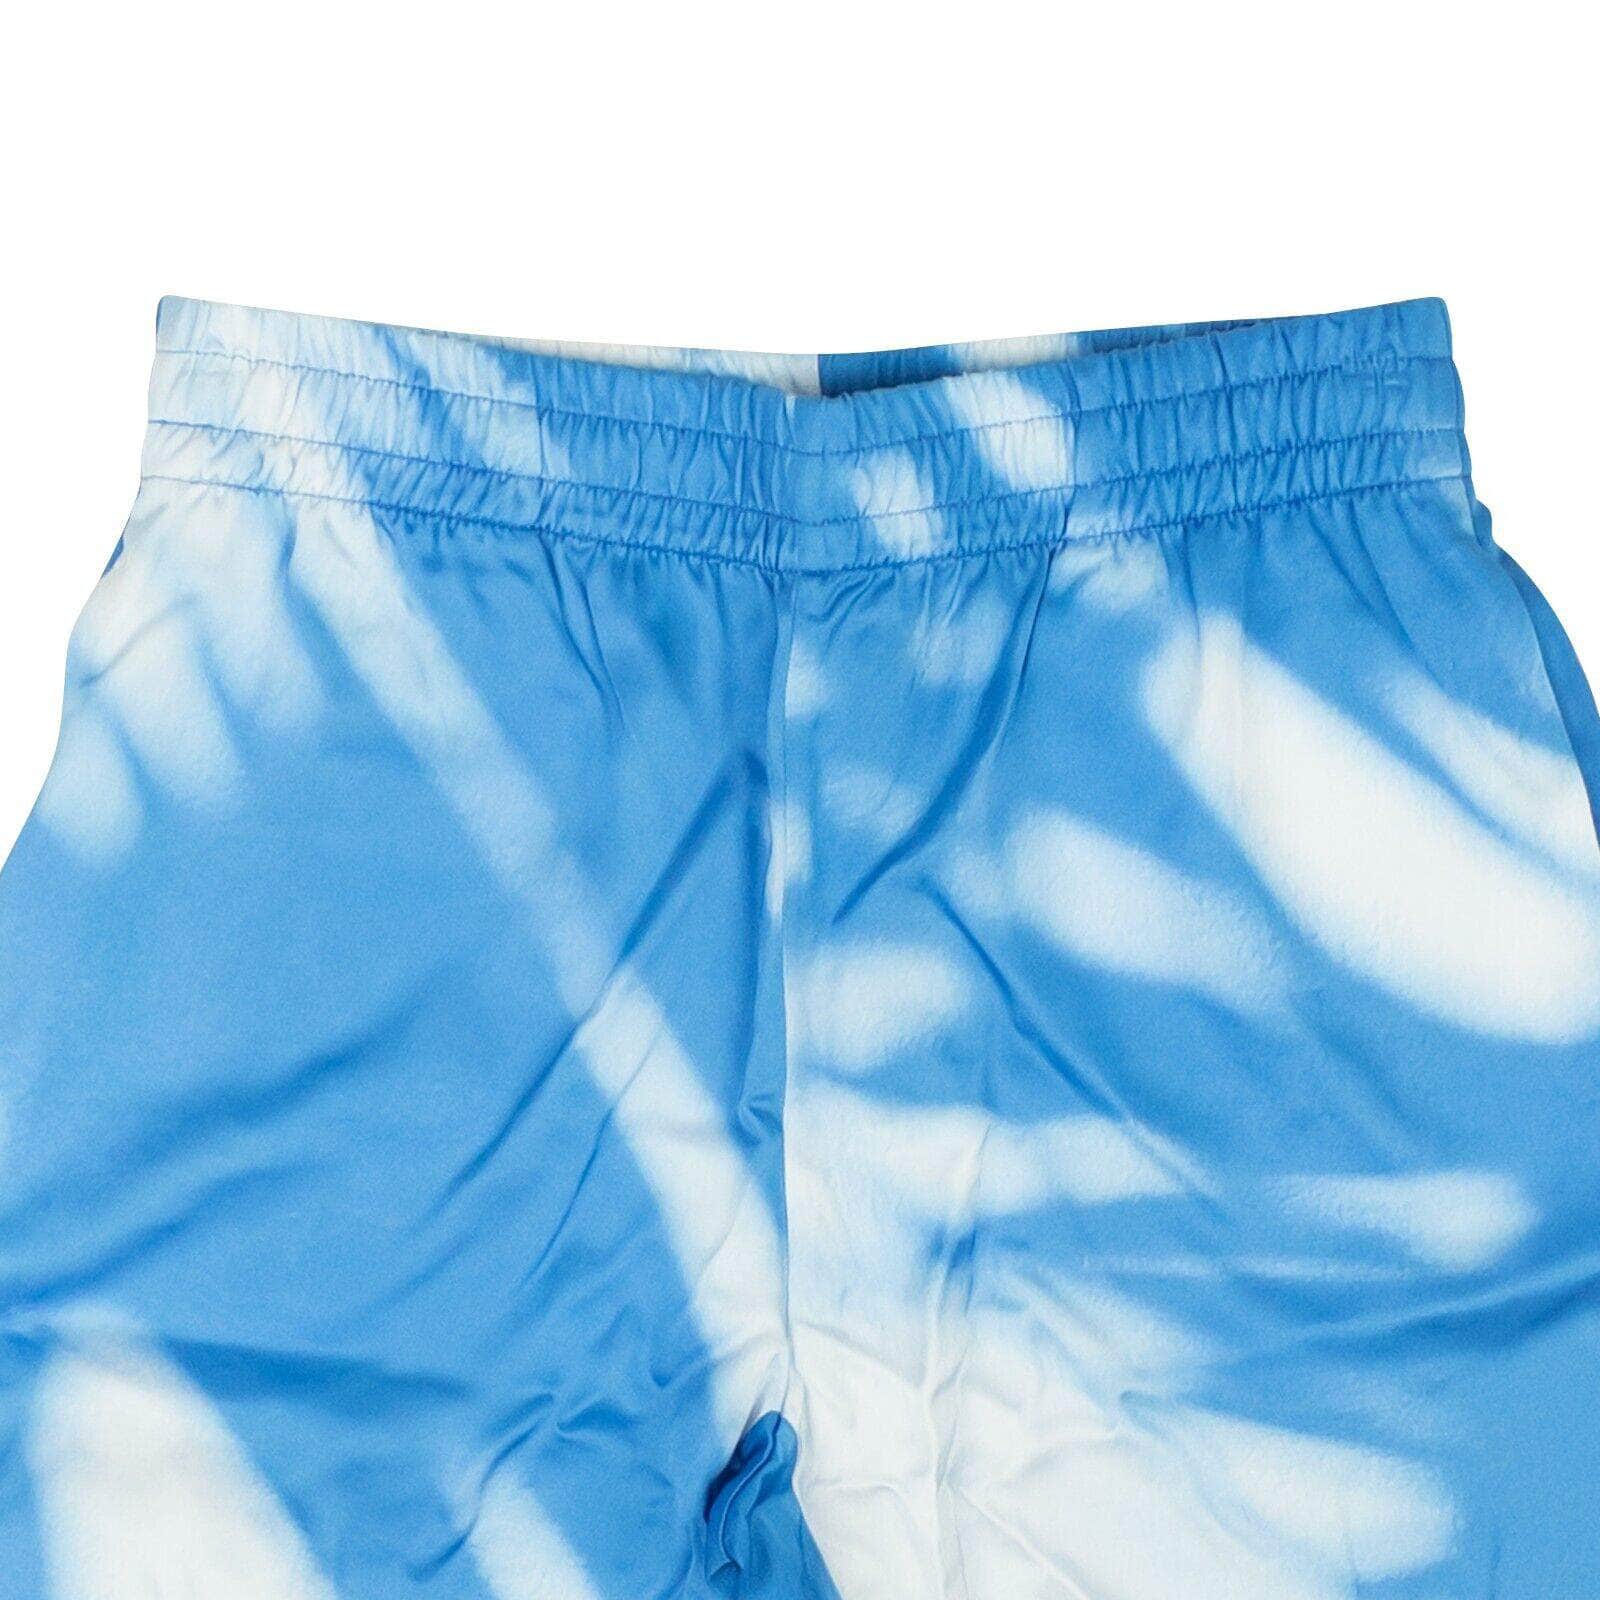 Blue Sky Inn blue-sky-inn, channelenable-all, chicmi, couponcollection, gender-mens, main-clothing, mens-shoes, size-l, size-s, size-xl, under-250 Blue Viscose Shadow Print Satin Shorts